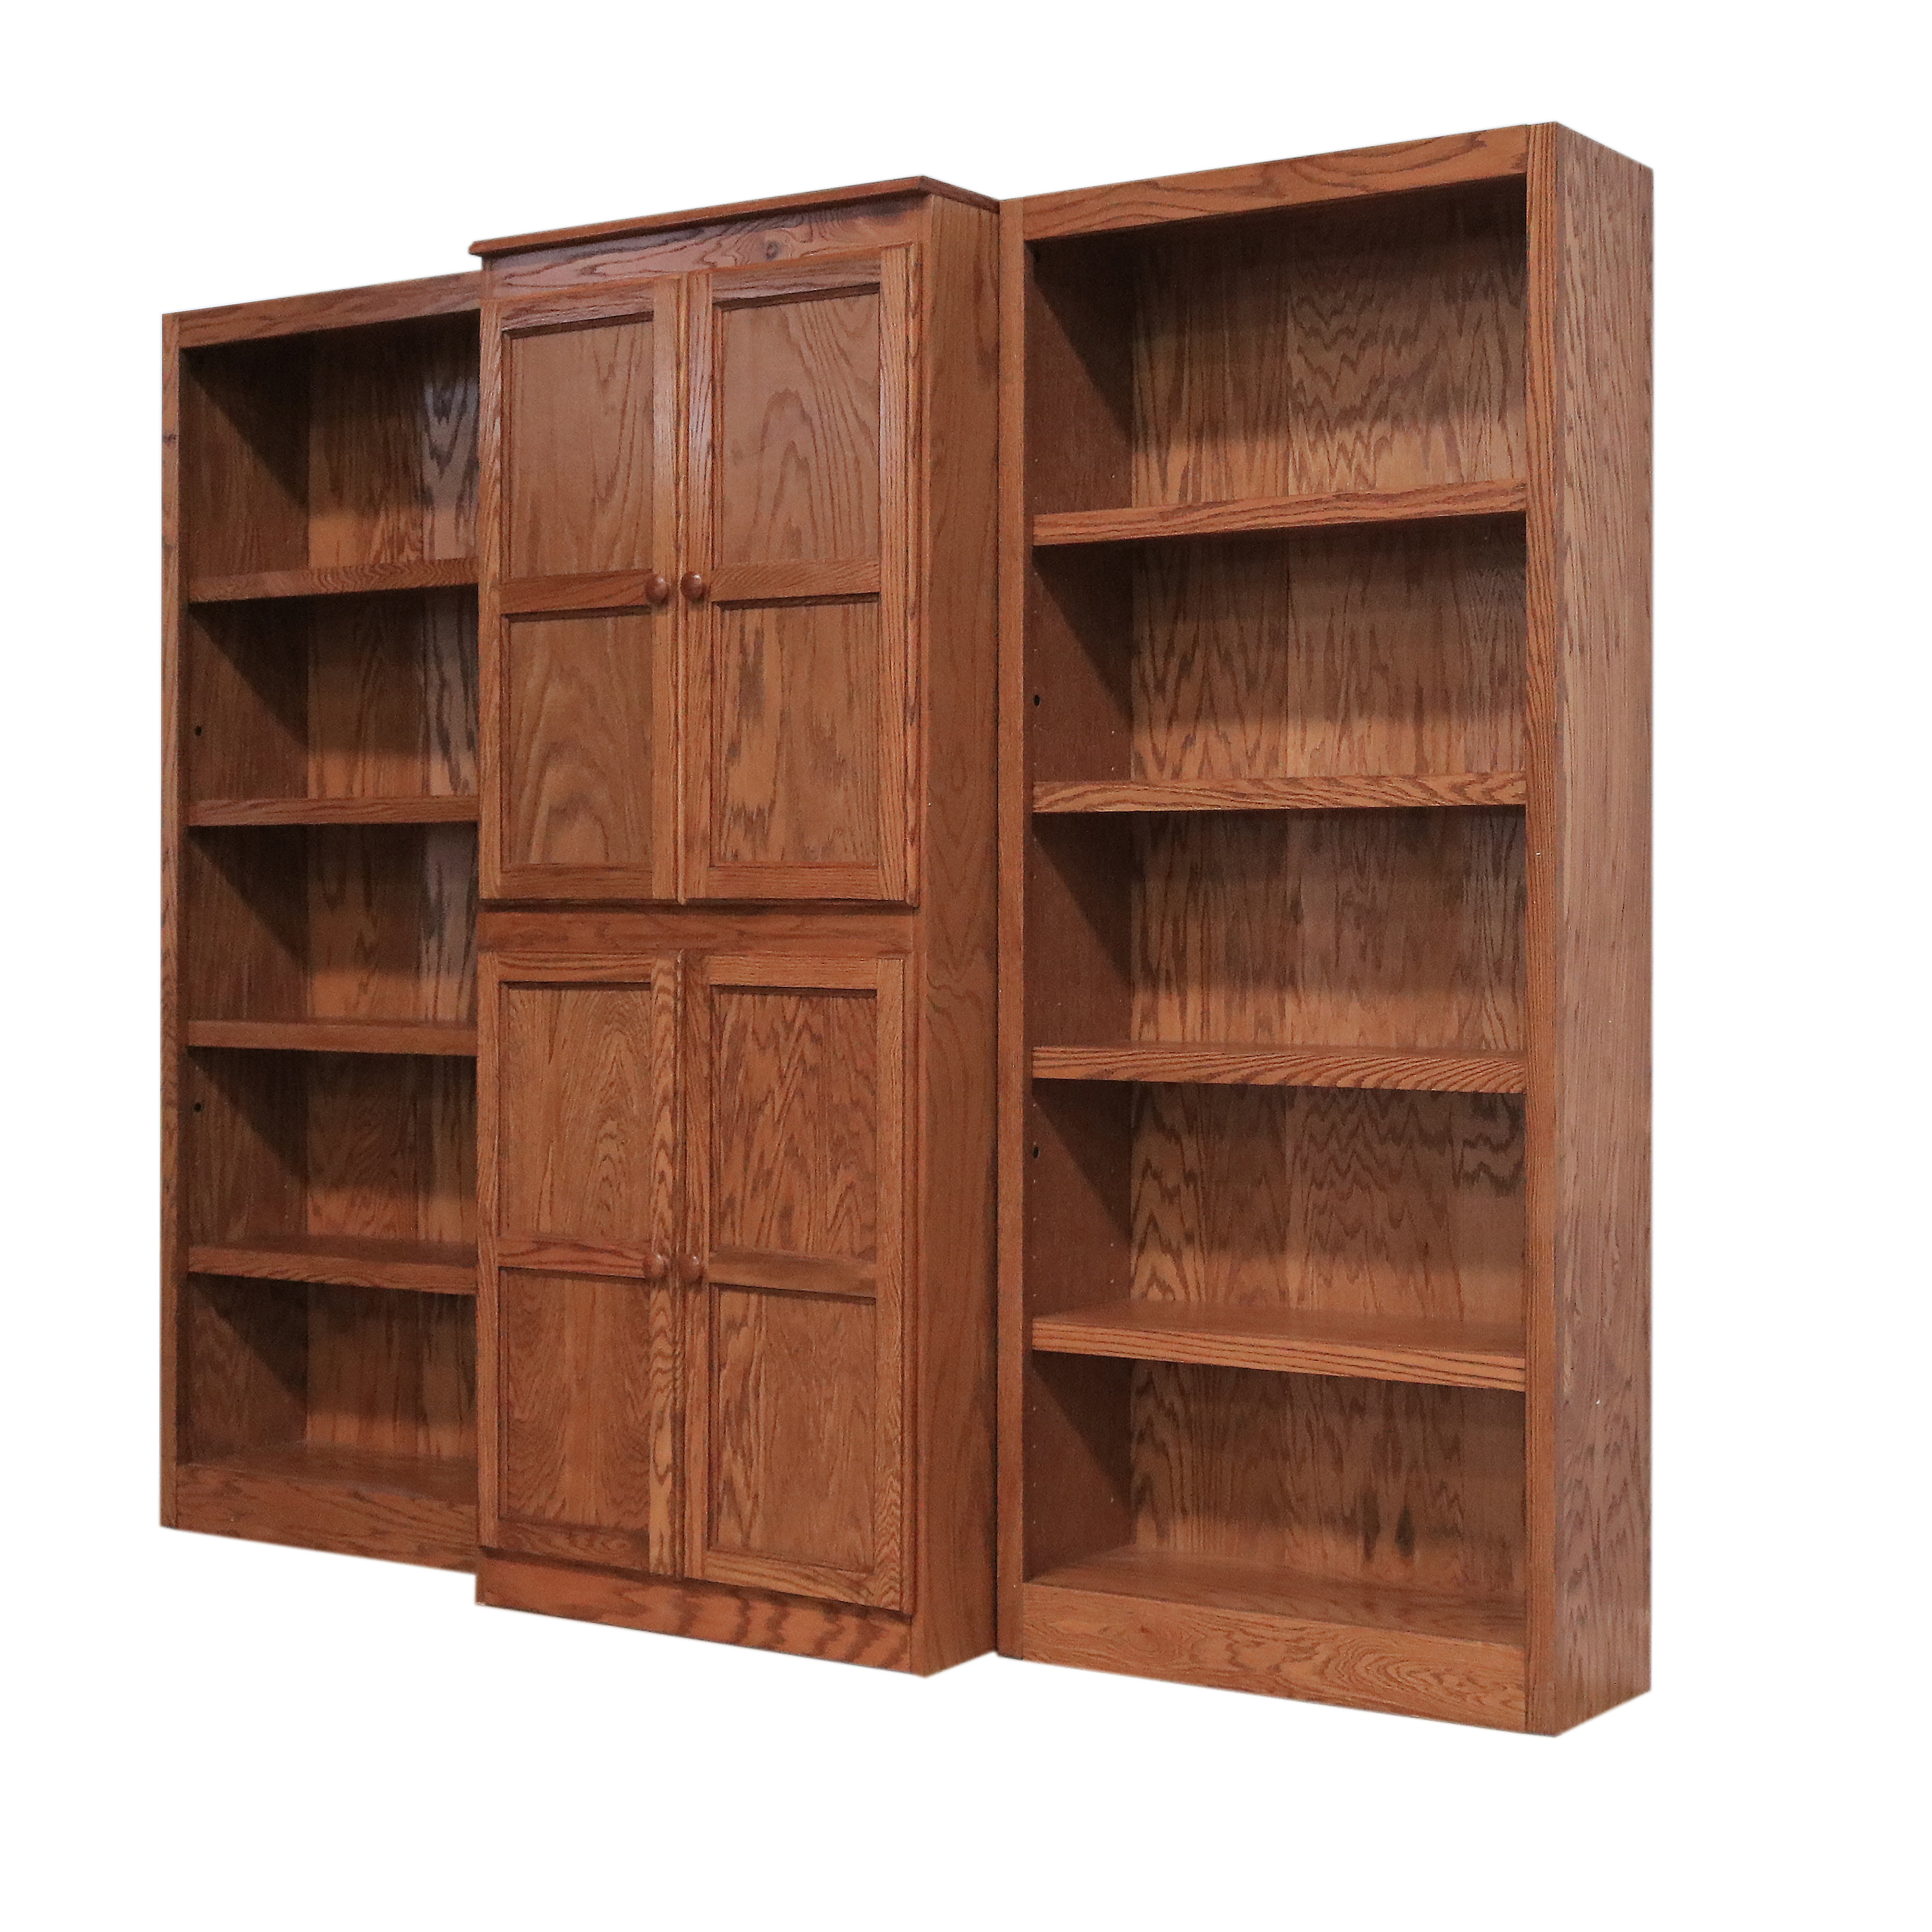 Concepts in Wood 15 Shelf Bookcase Wall with Doors, 72 inch Tall - Oak